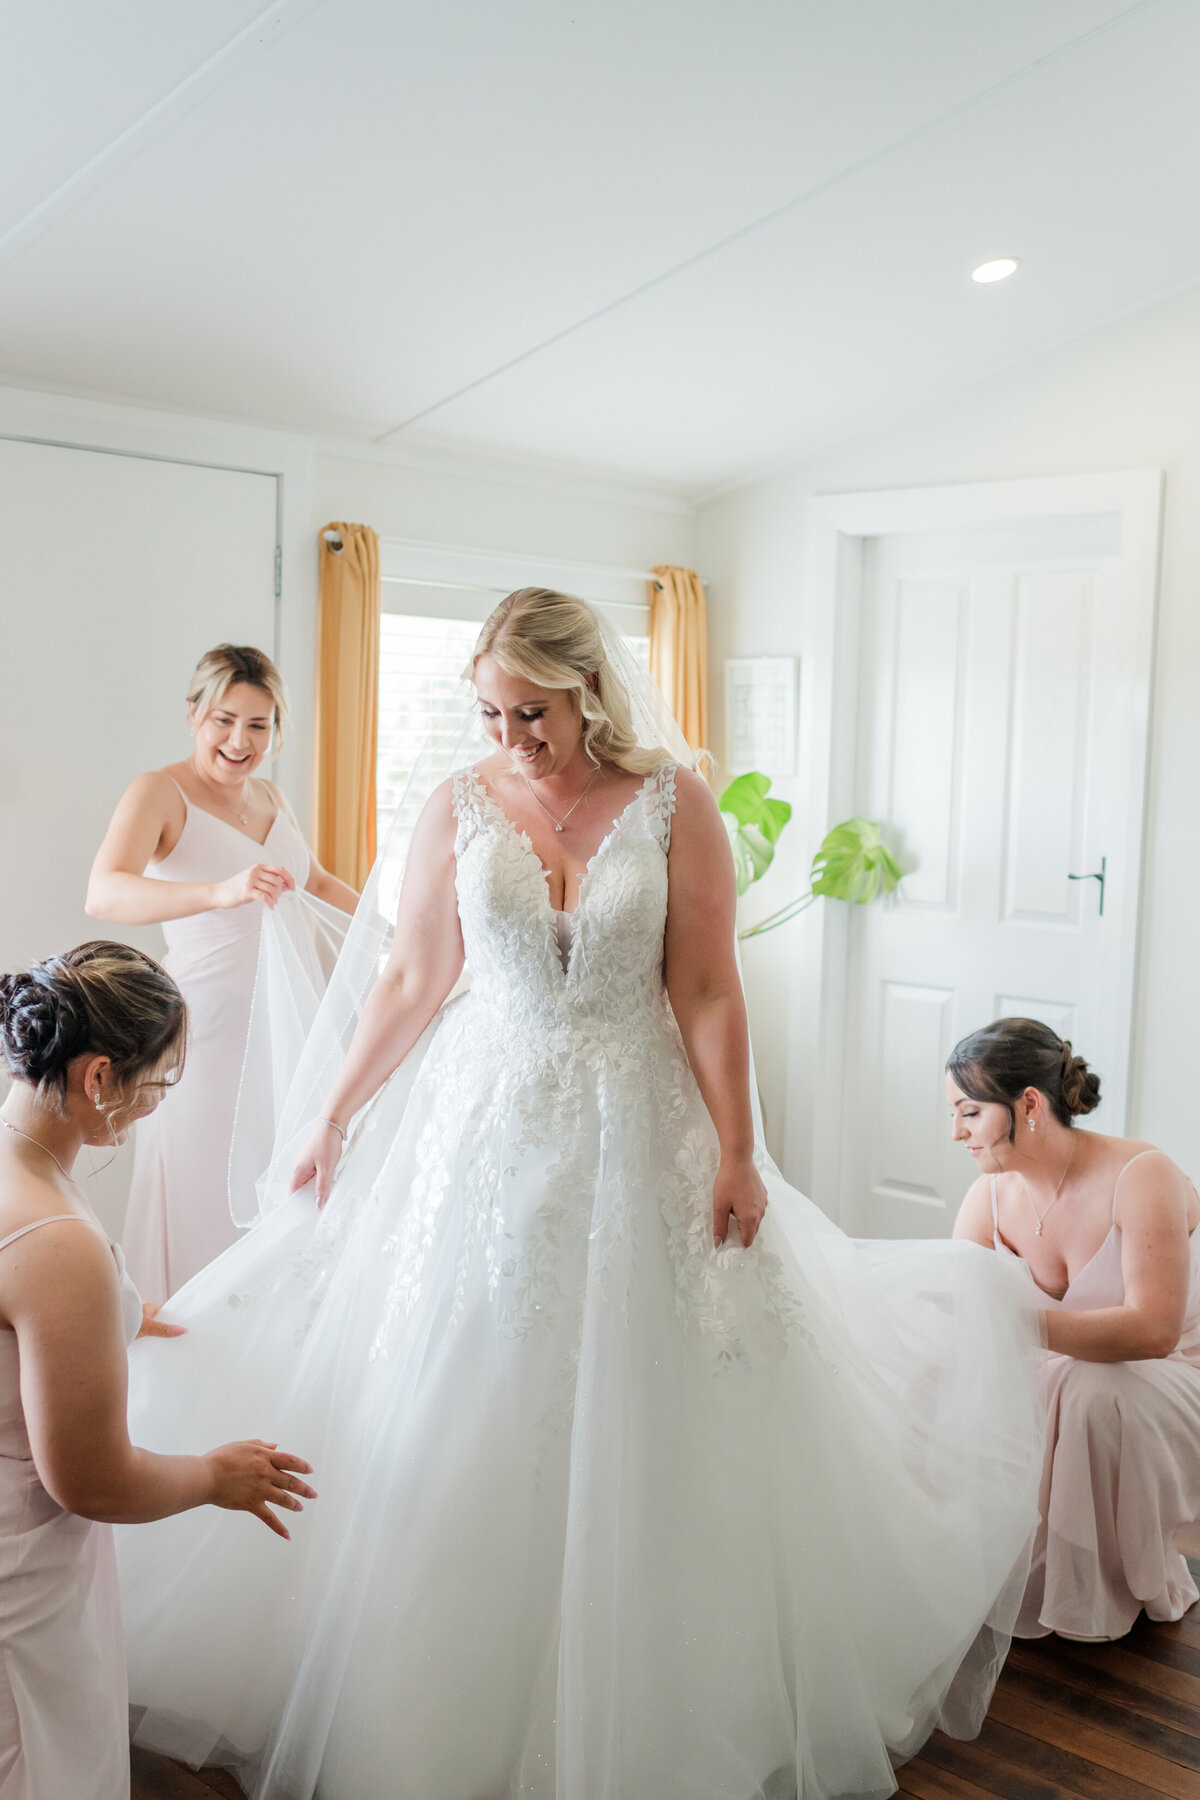 Bride and her bridesmaids getting ready